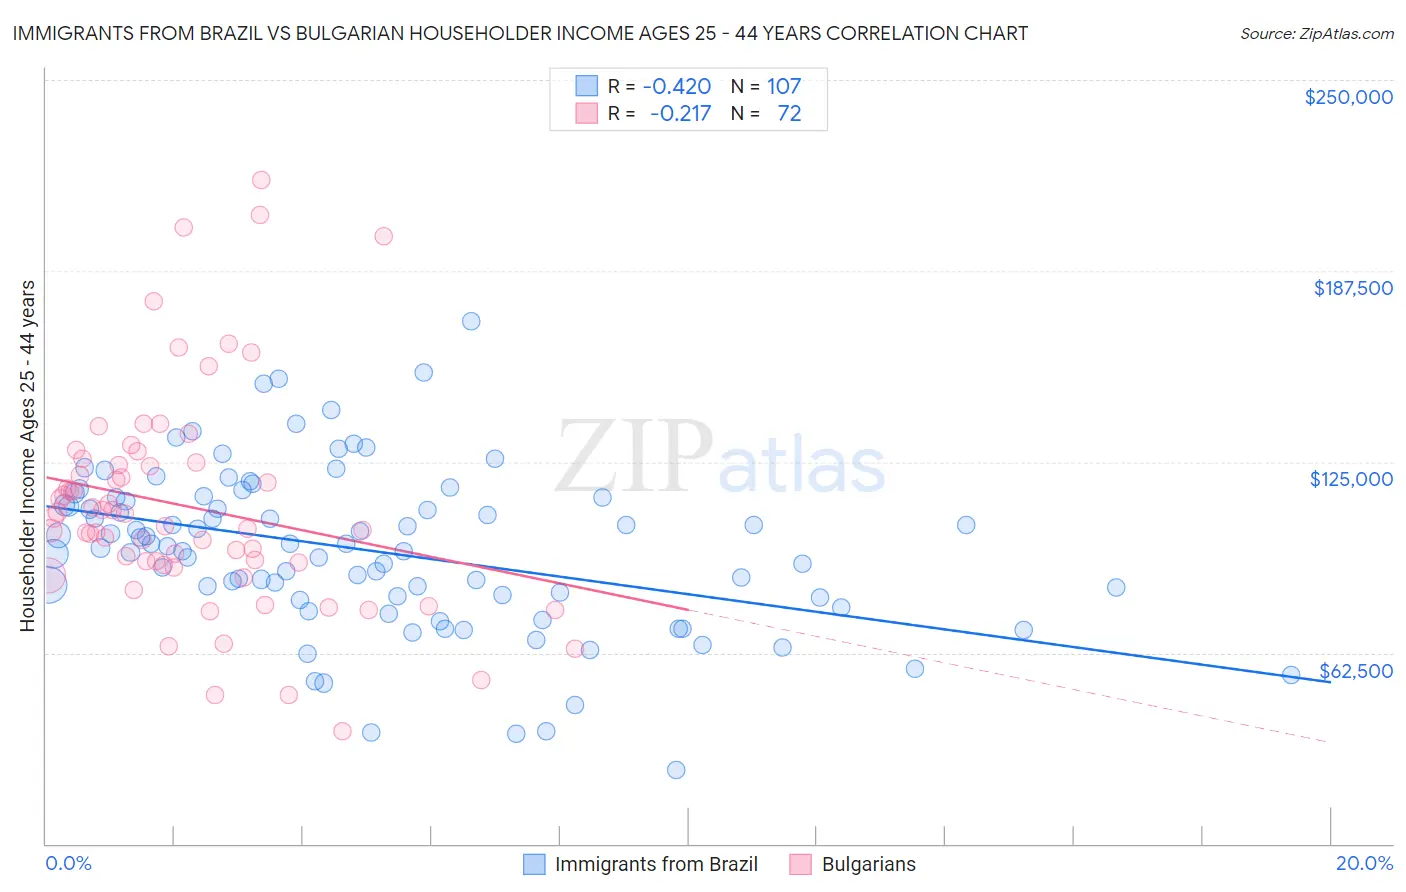 Immigrants from Brazil vs Bulgarian Householder Income Ages 25 - 44 years